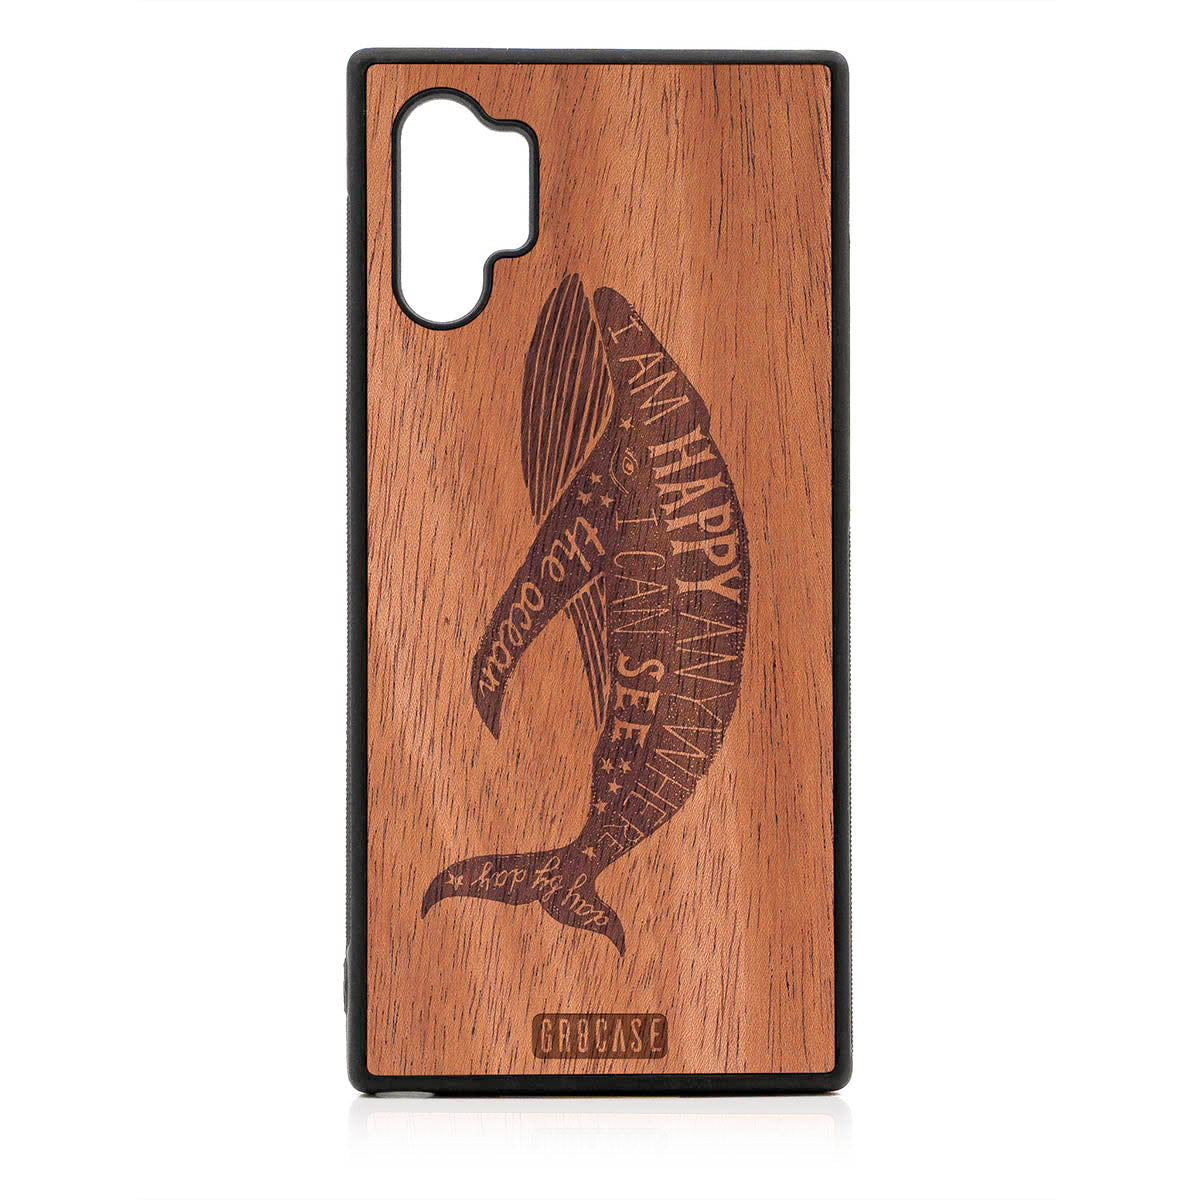 I'm Happy Anywhere I Can See The Ocean (Whale) Design Wood Case For Samsung Galaxy Note 10 Plus